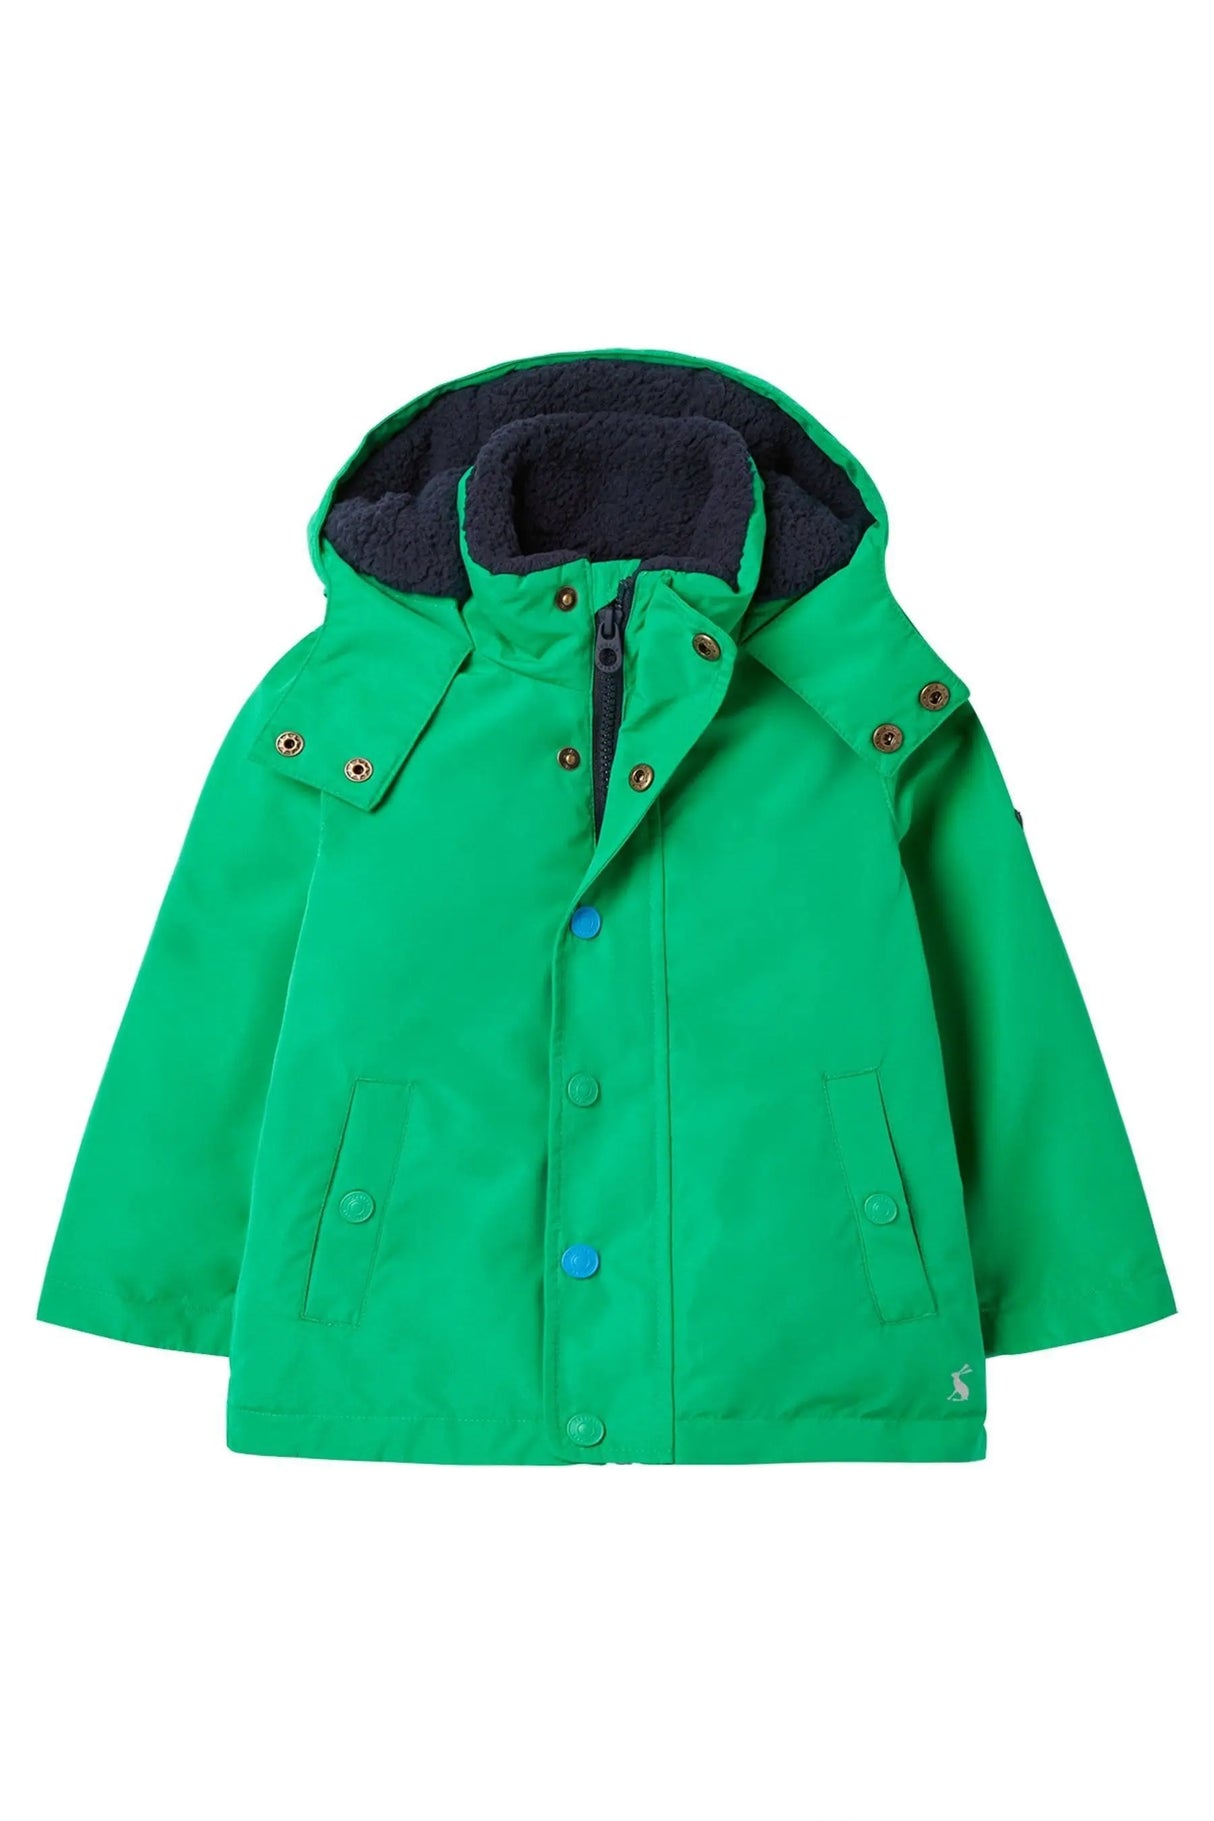 Buy Joules Cairn Colourblock Showerproof Padded Jacket from the